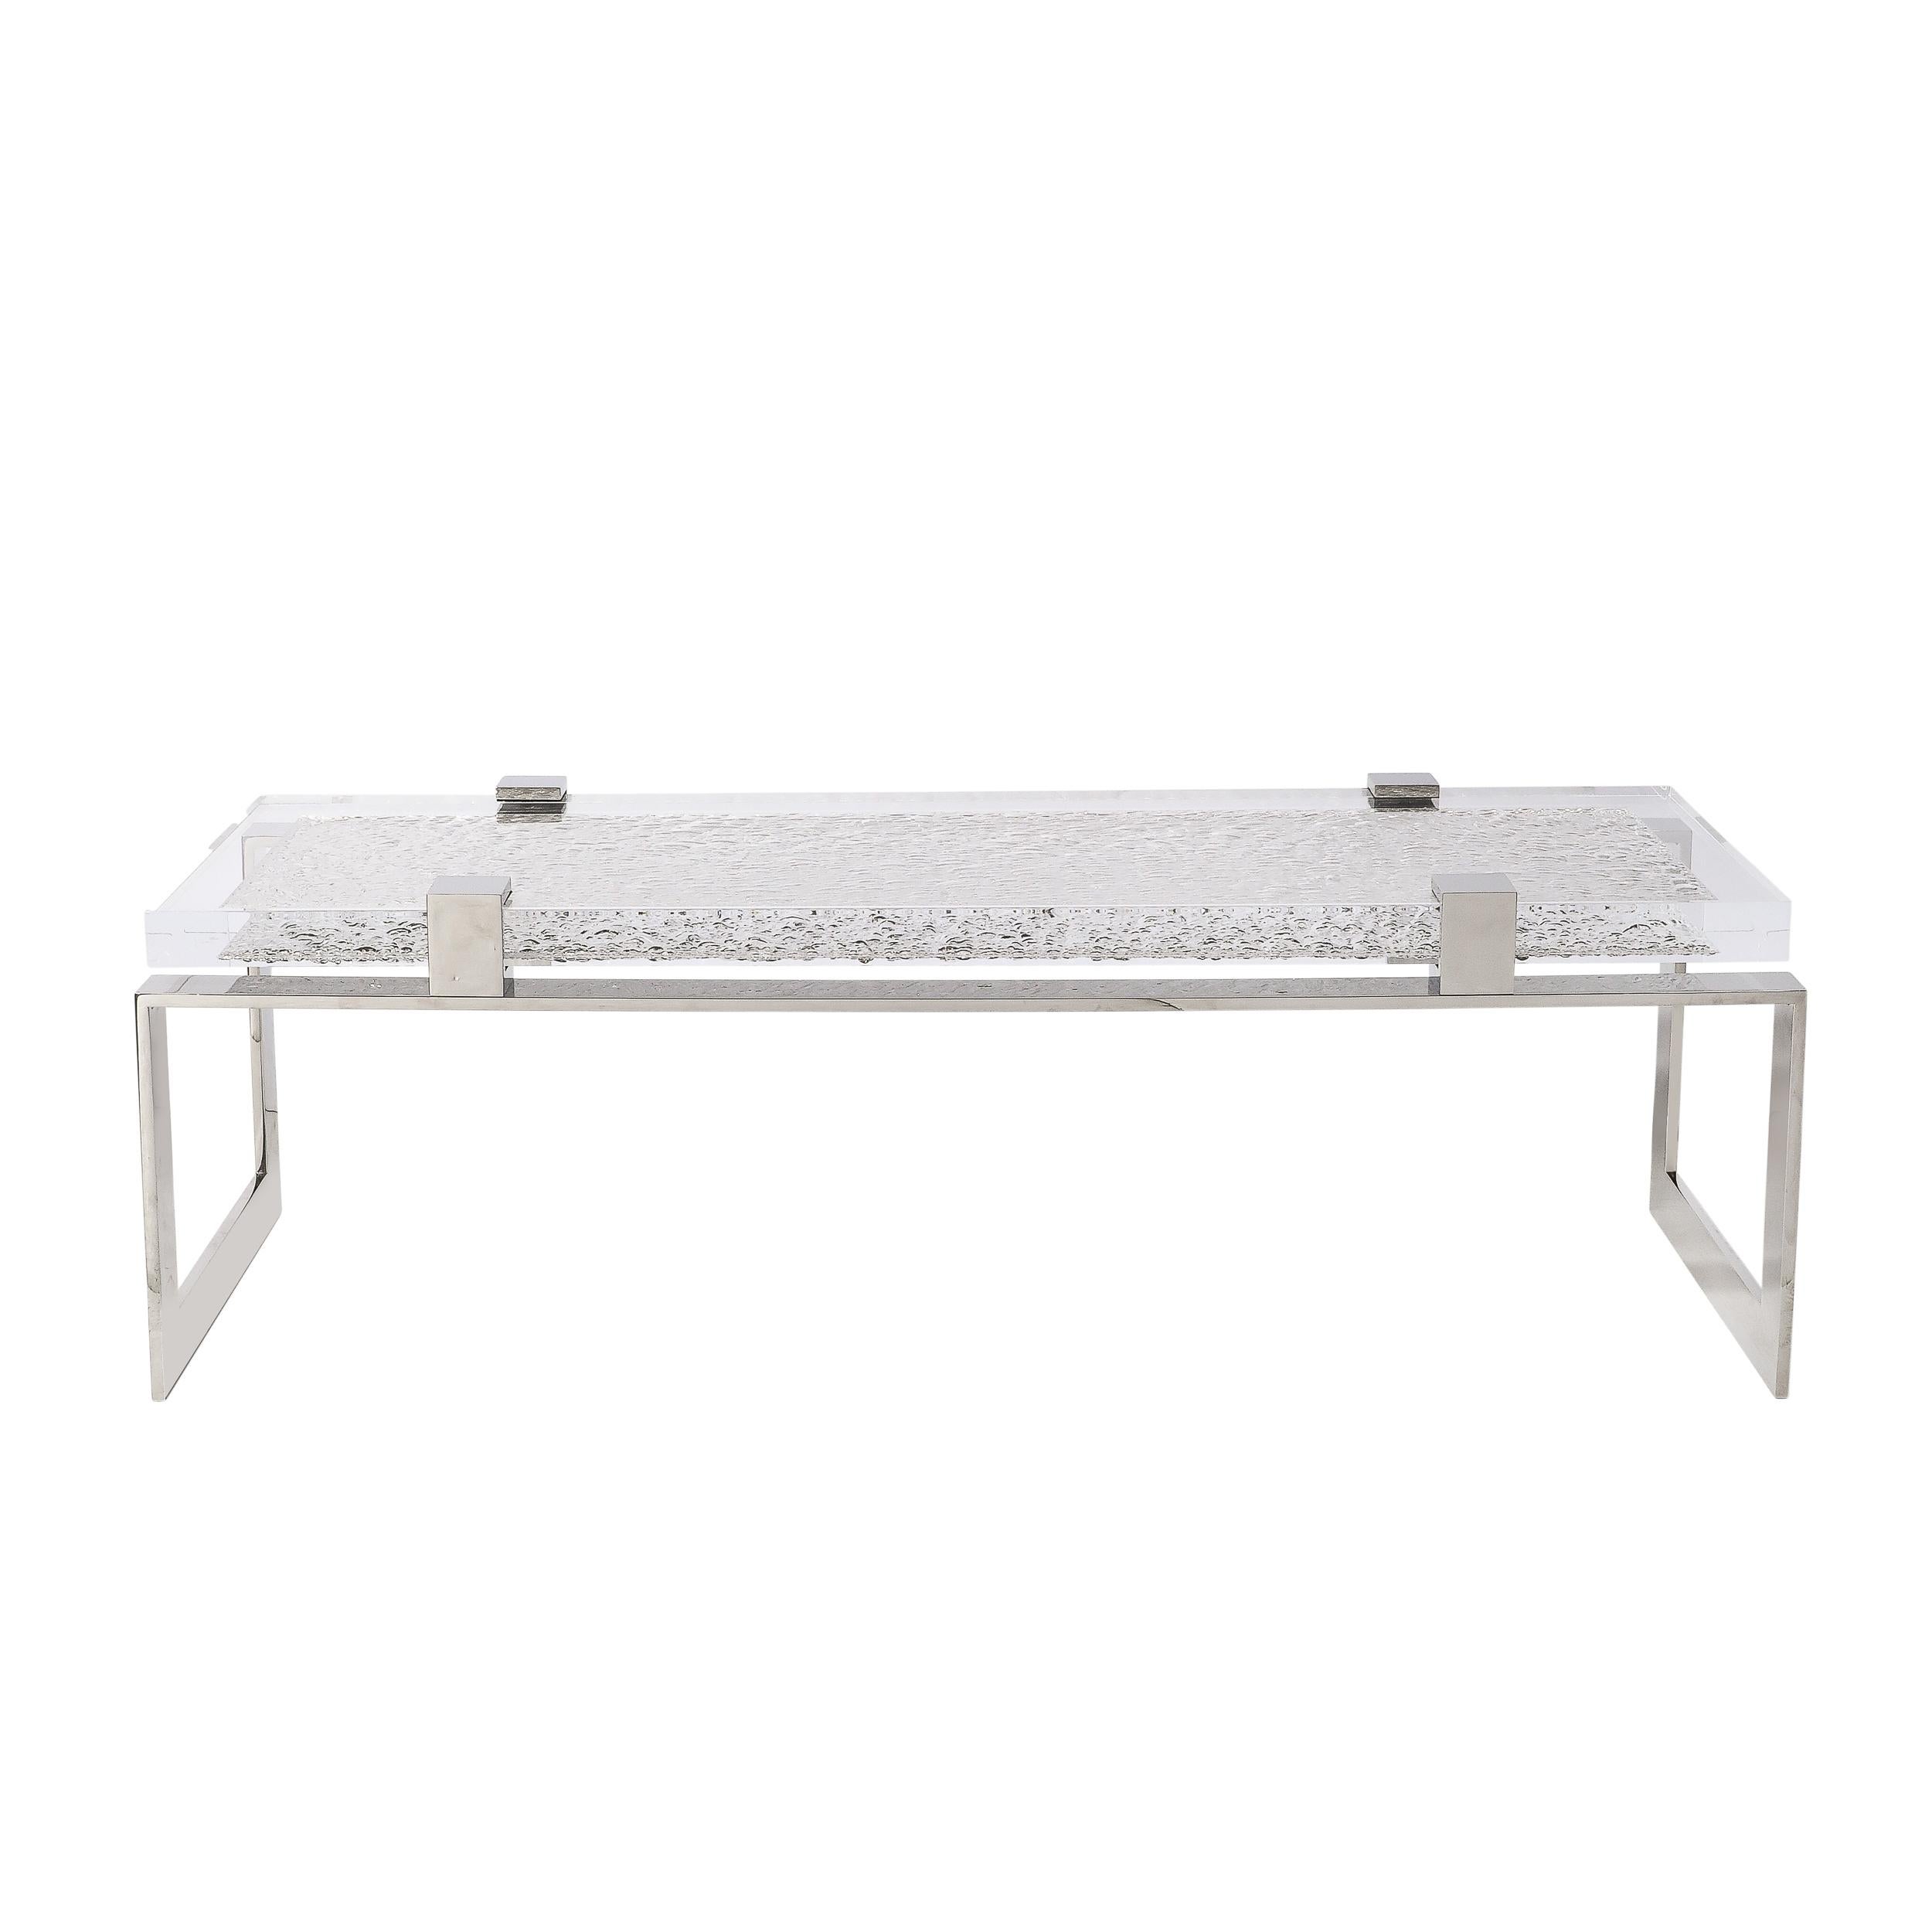 This Modernist nickel  and Lucite Chipped Block Cocktail Table by Lorin Marsh originates from the United States during the late 20th Century. Featuring a long rectangular composition in bands of polished nickel with a stunning lucite top surface